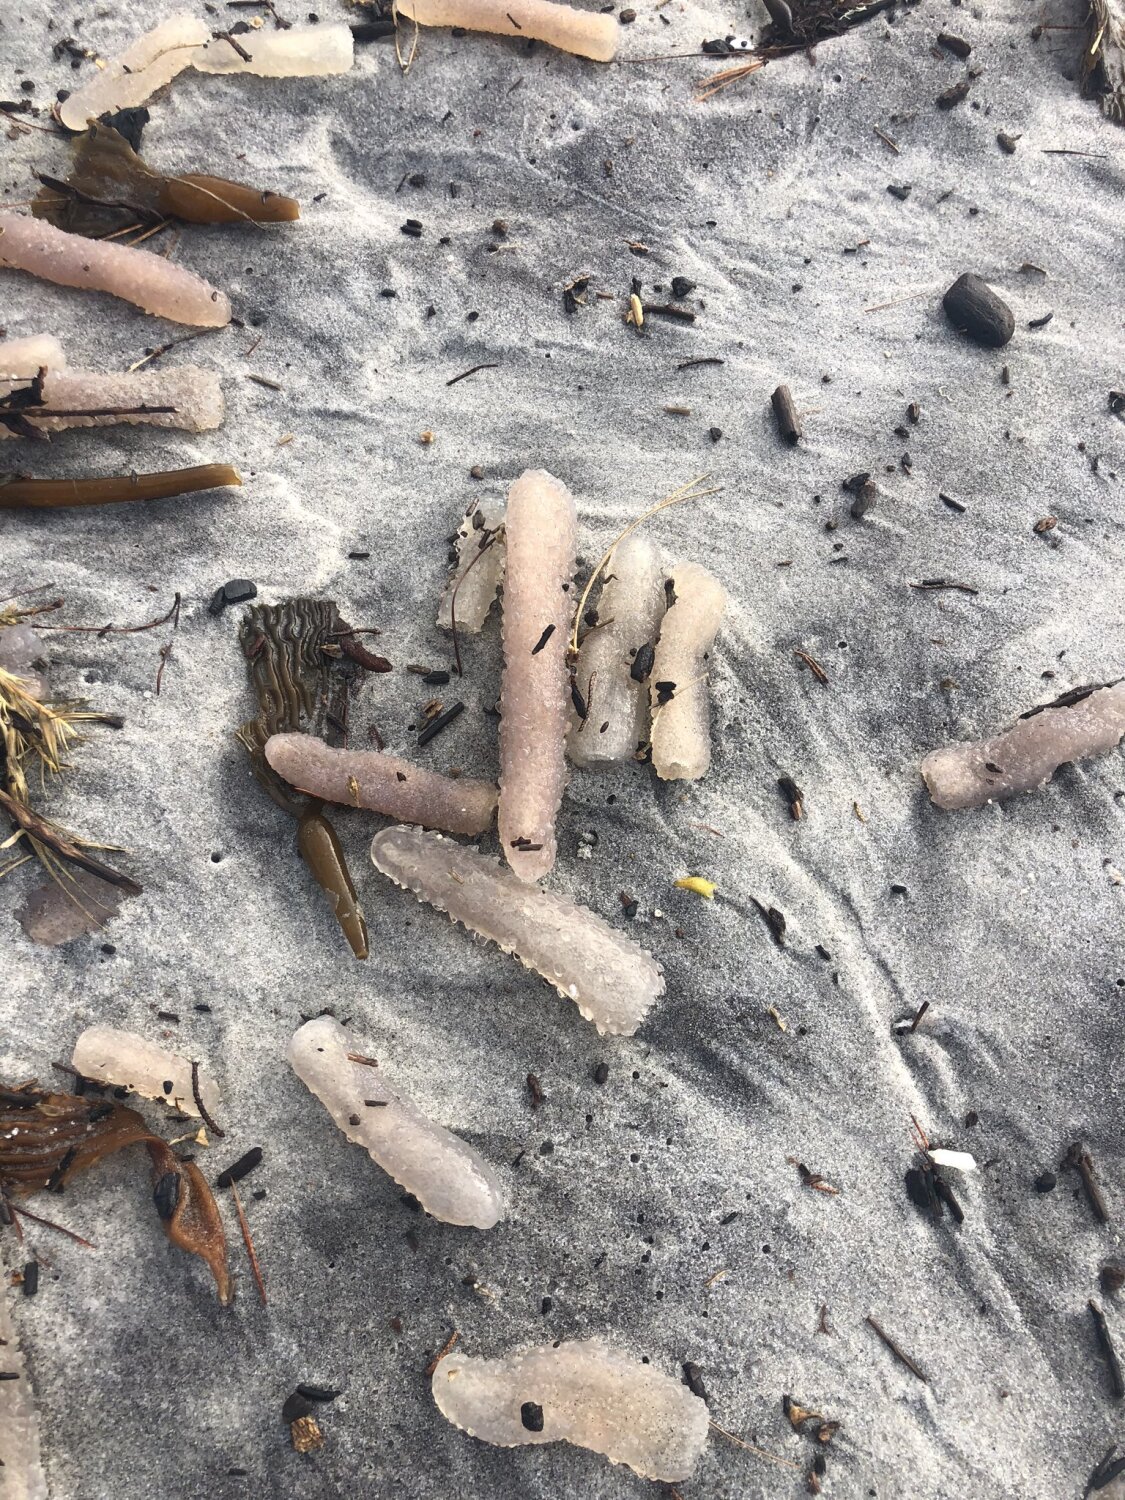 Penis fish and sea pickles: Weird creatures wash ashore amid Northern California storms